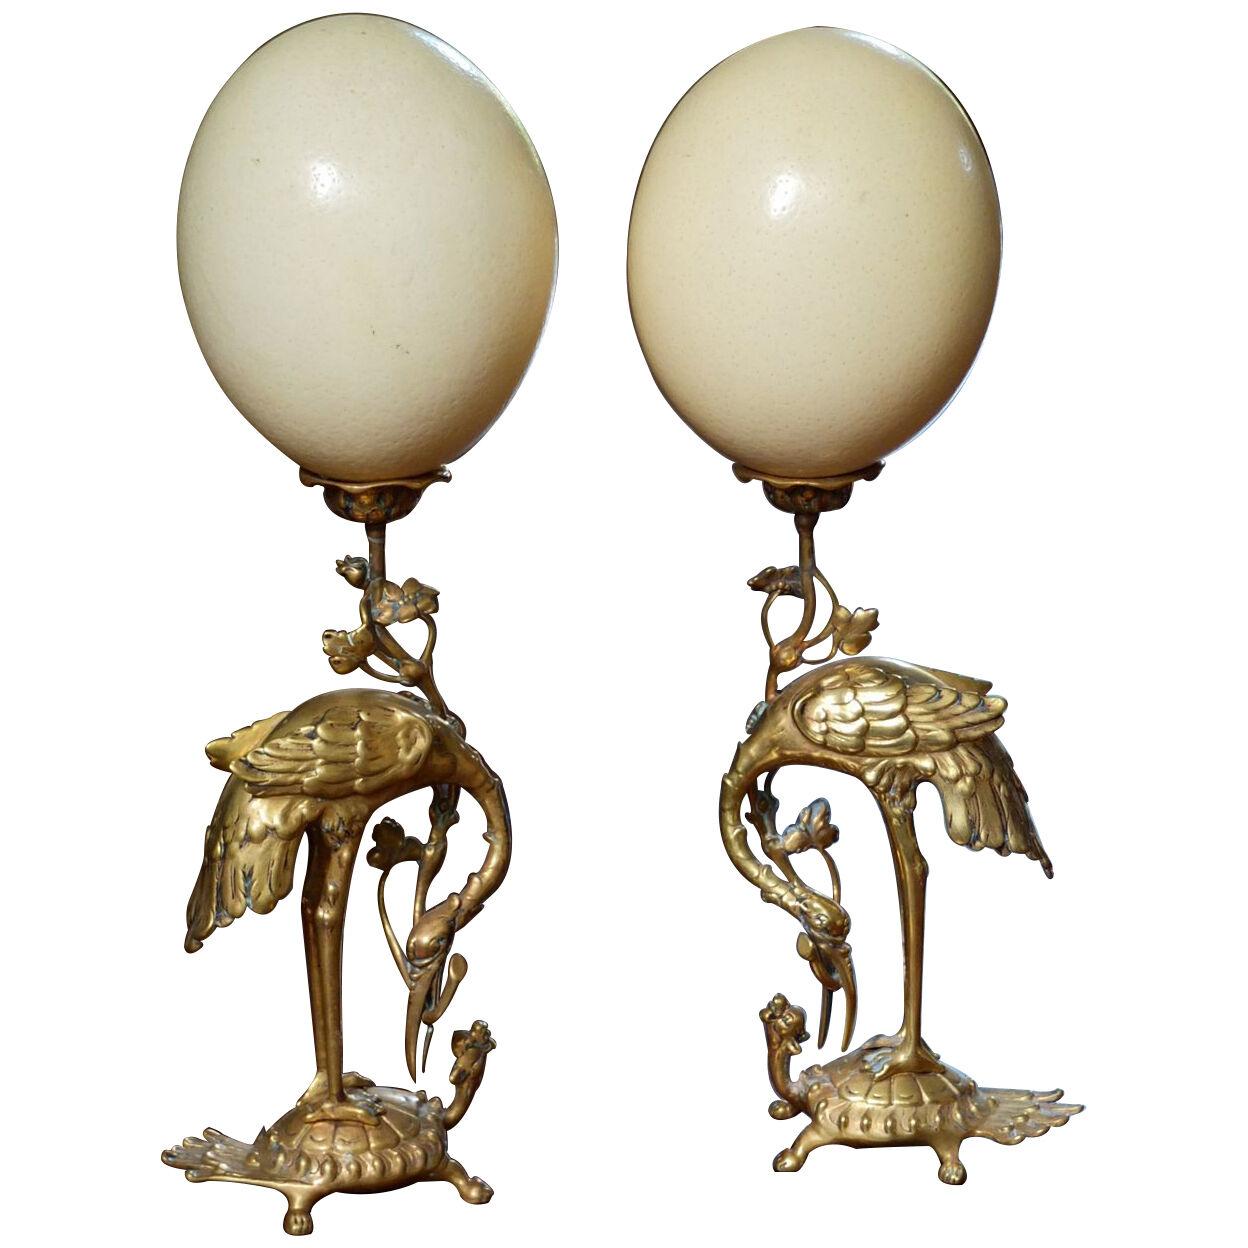 Pair of Ostrich eggs mounted on bronze .